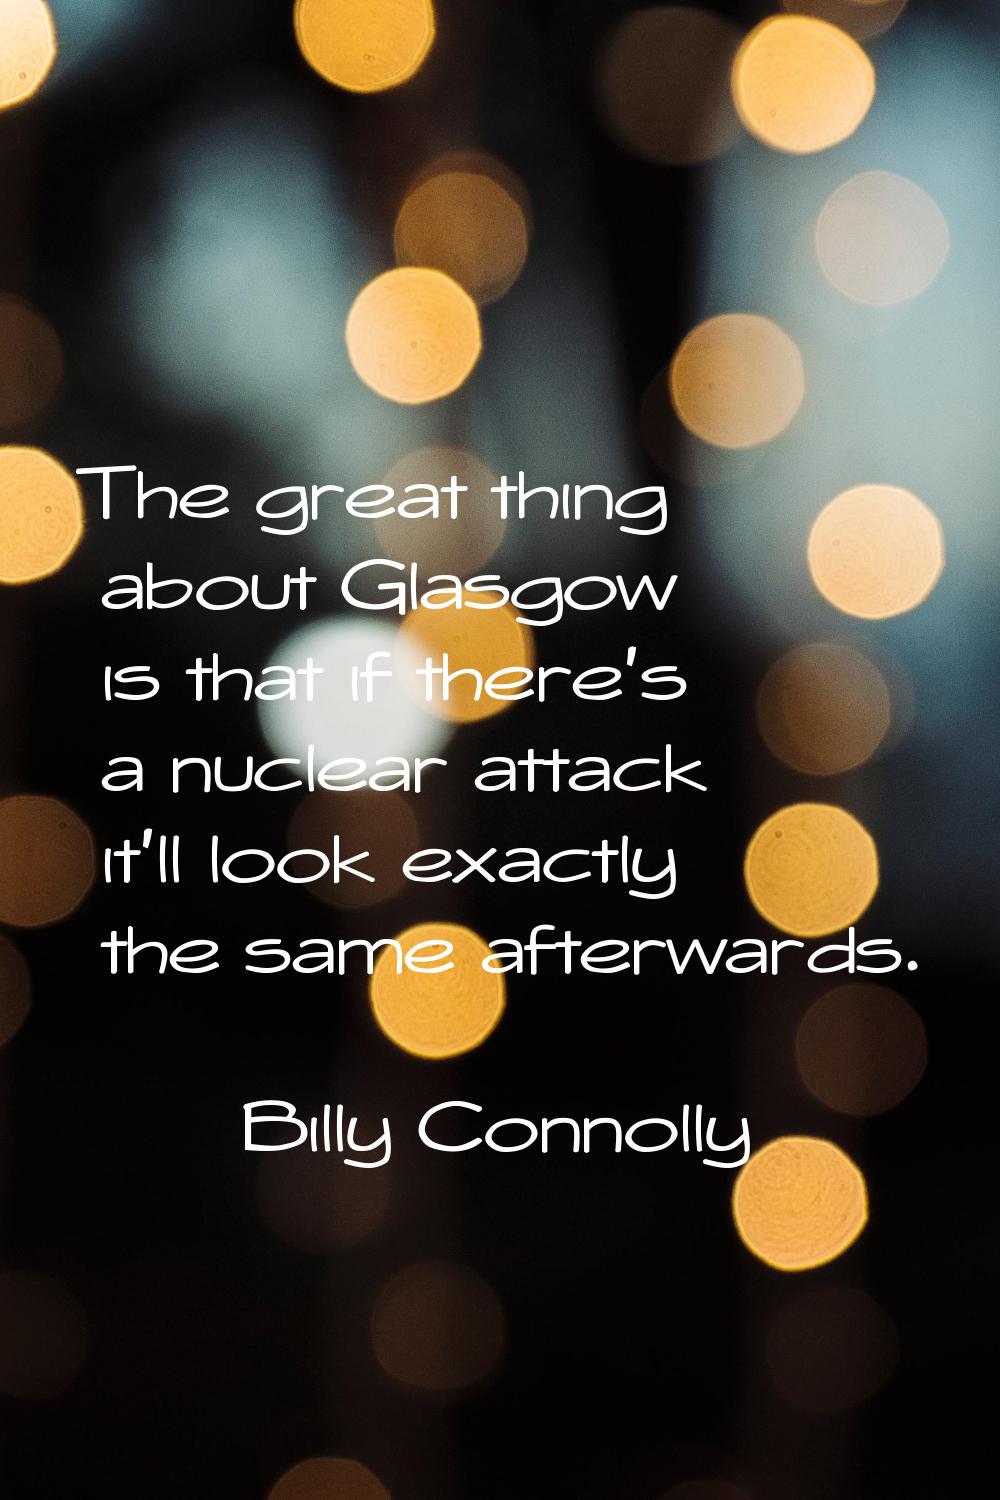 The great thing about Glasgow is that if there's a nuclear attack it'll look exactly the same after